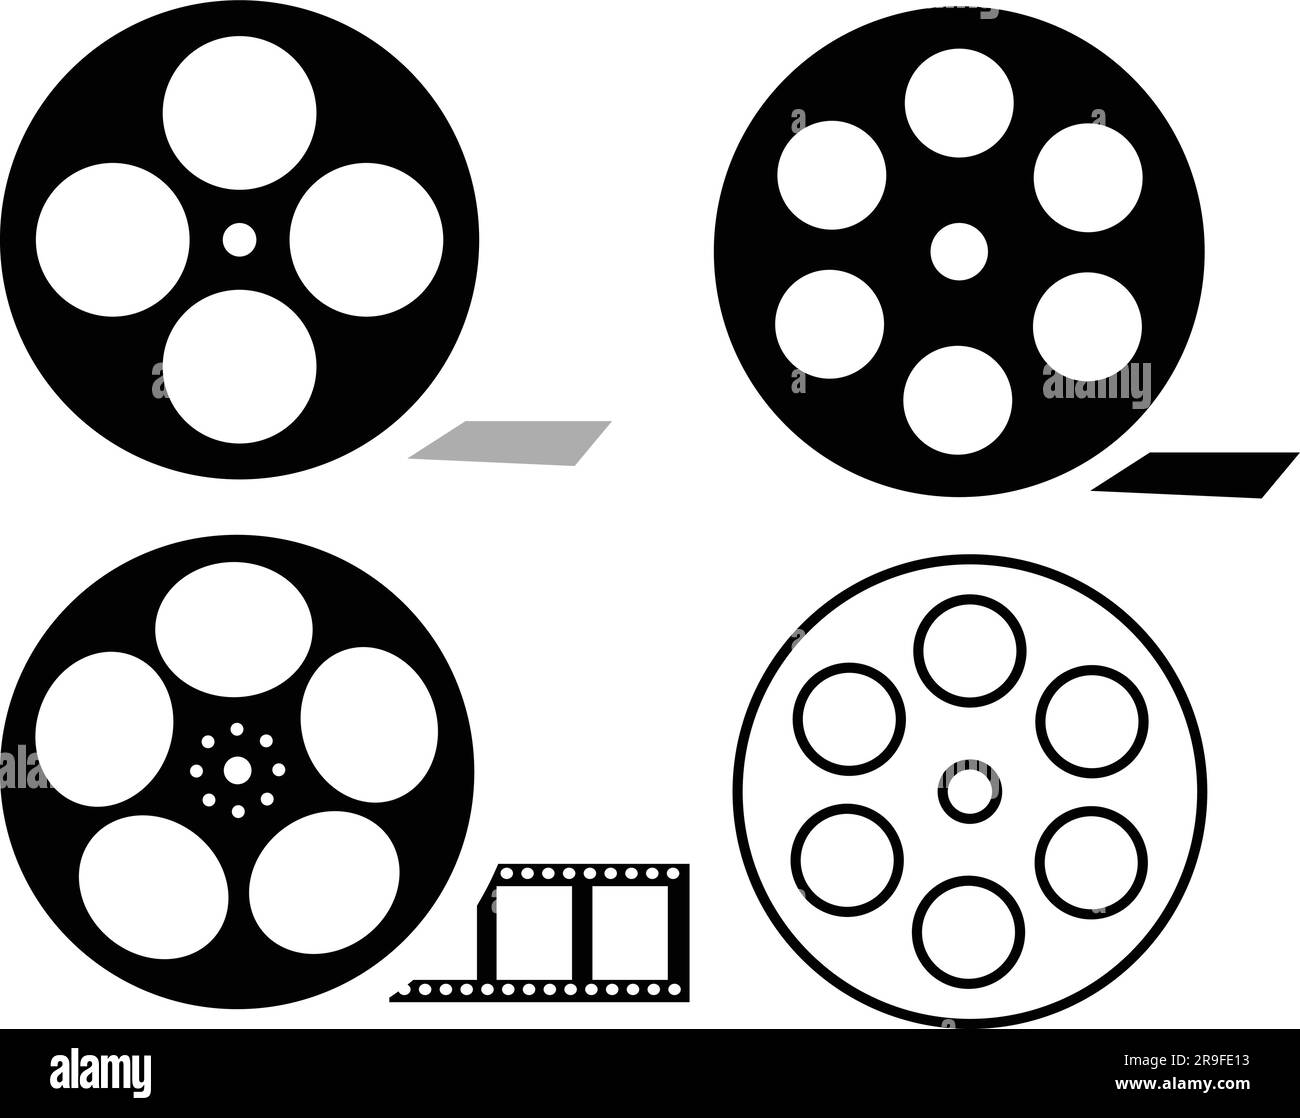 https://c8.alamy.com/comp/2R9FE13/film-reel-and-twisted-old-cinema-tape-set-film-reel-movie-icon-collection-old-retro-reel-with-film-strip-film-recorder-tape-group-2R9FE13.jpg